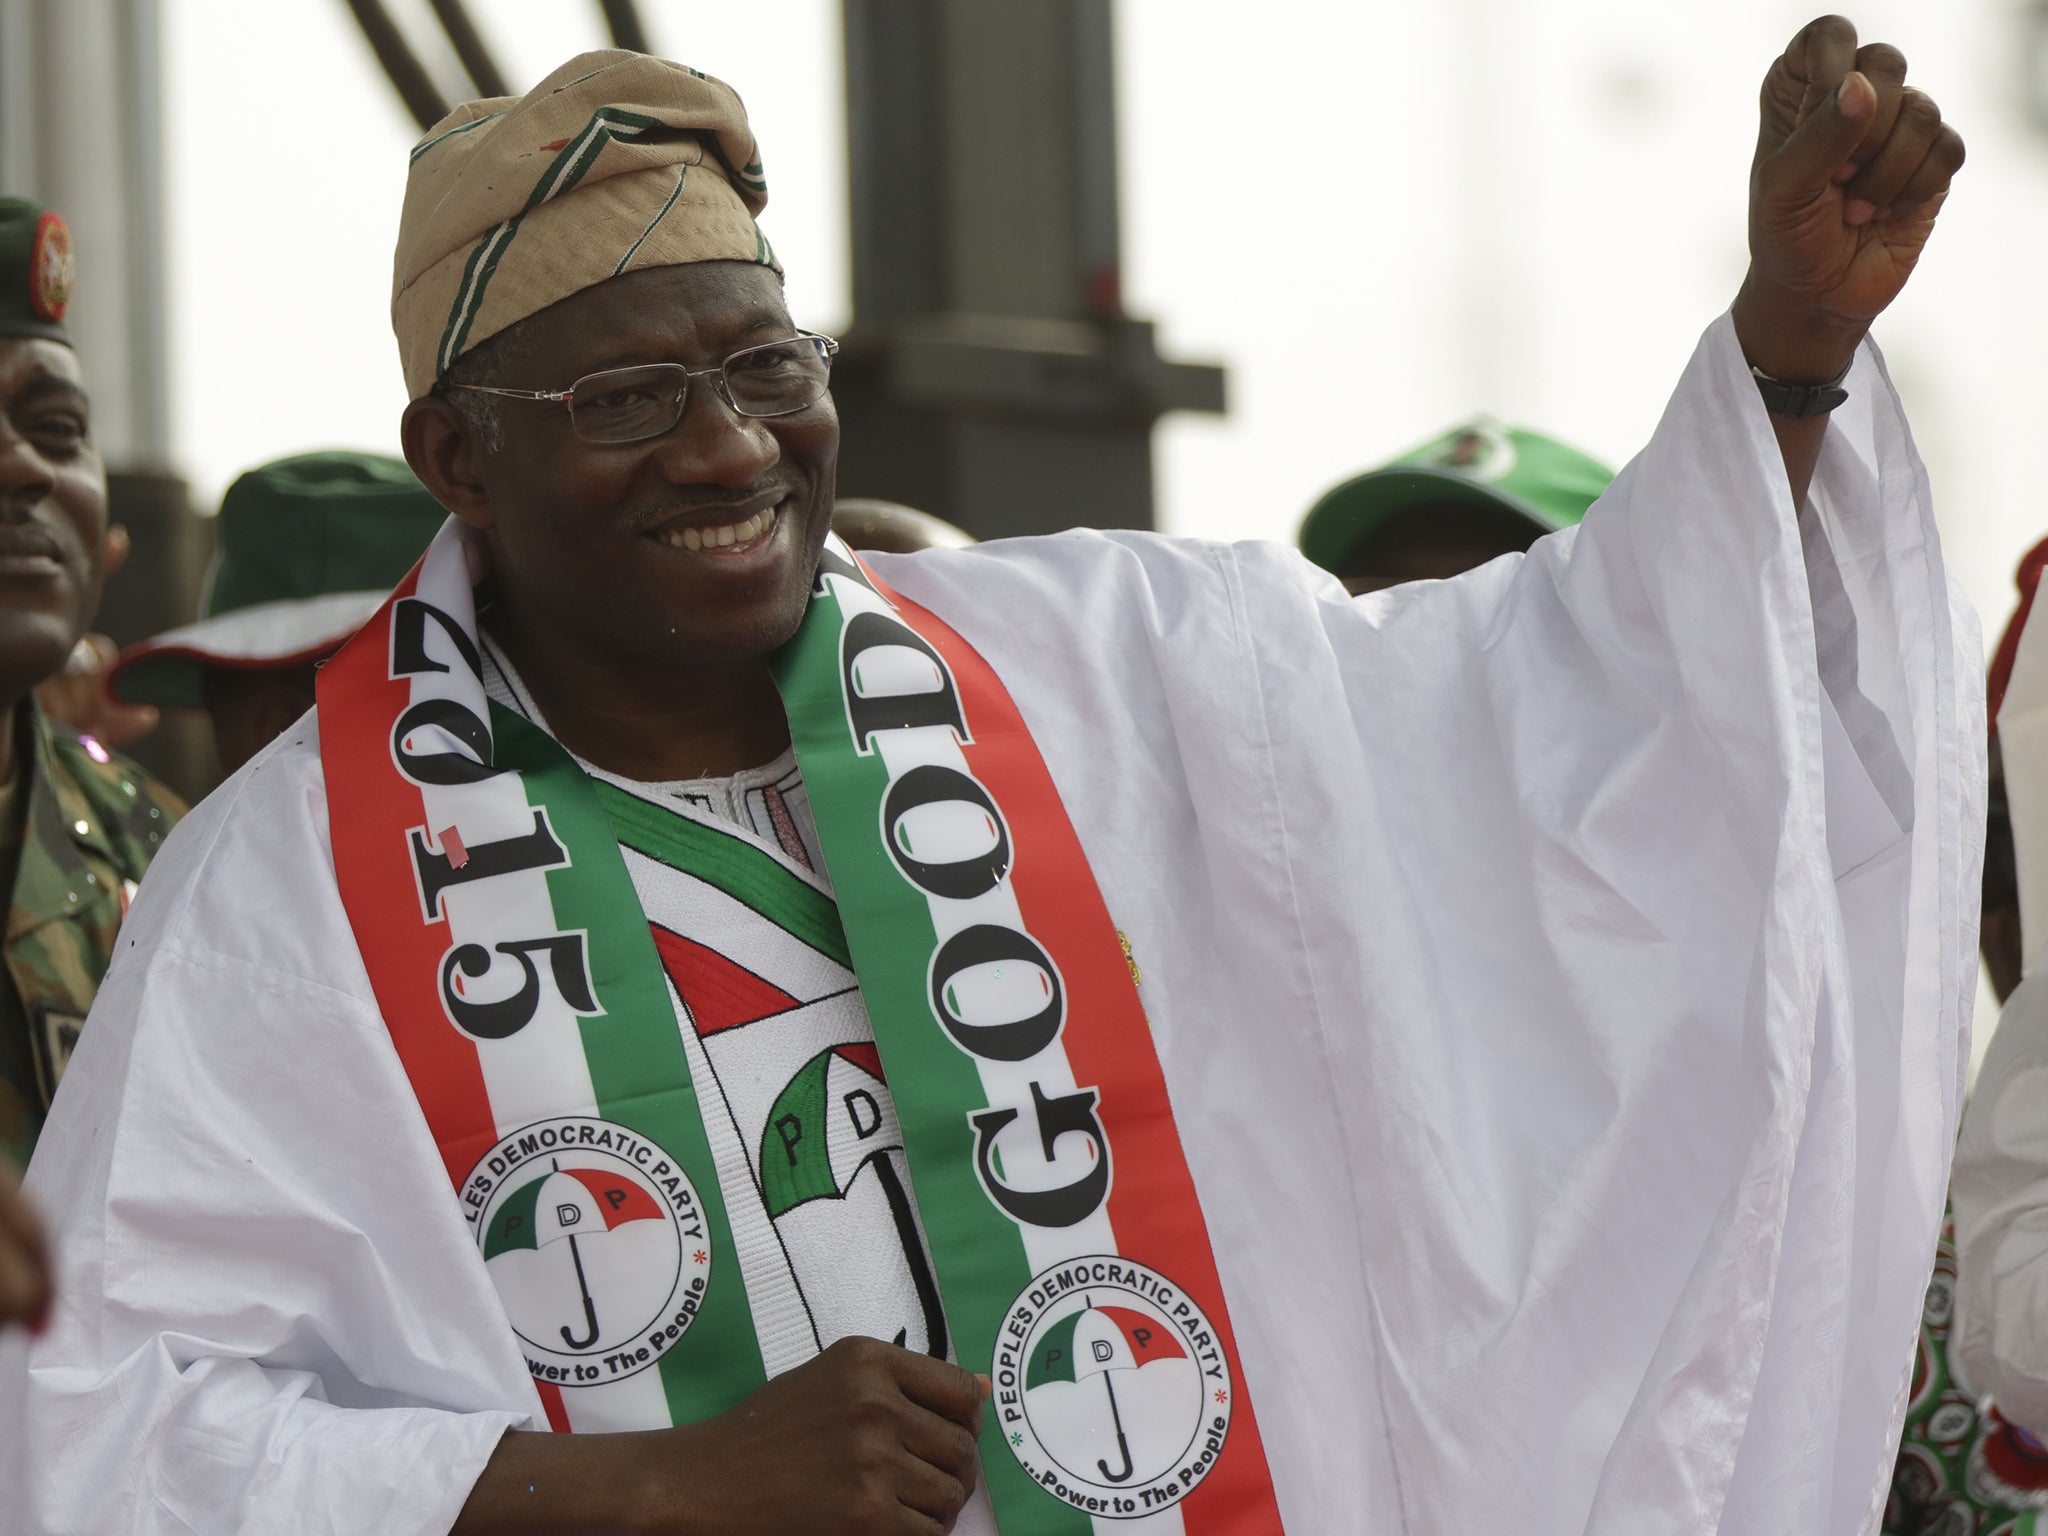 President Goodluck Jonathan faces a former military ruler in Nigeria’s election next month